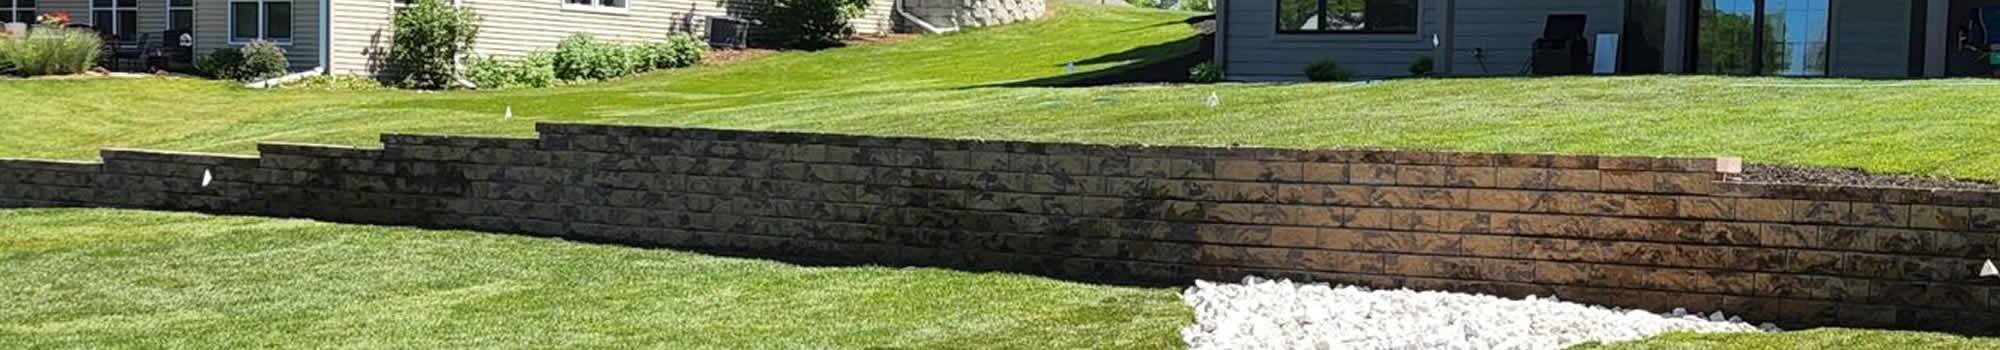 Landscape Maintenance Services in Howards Grove